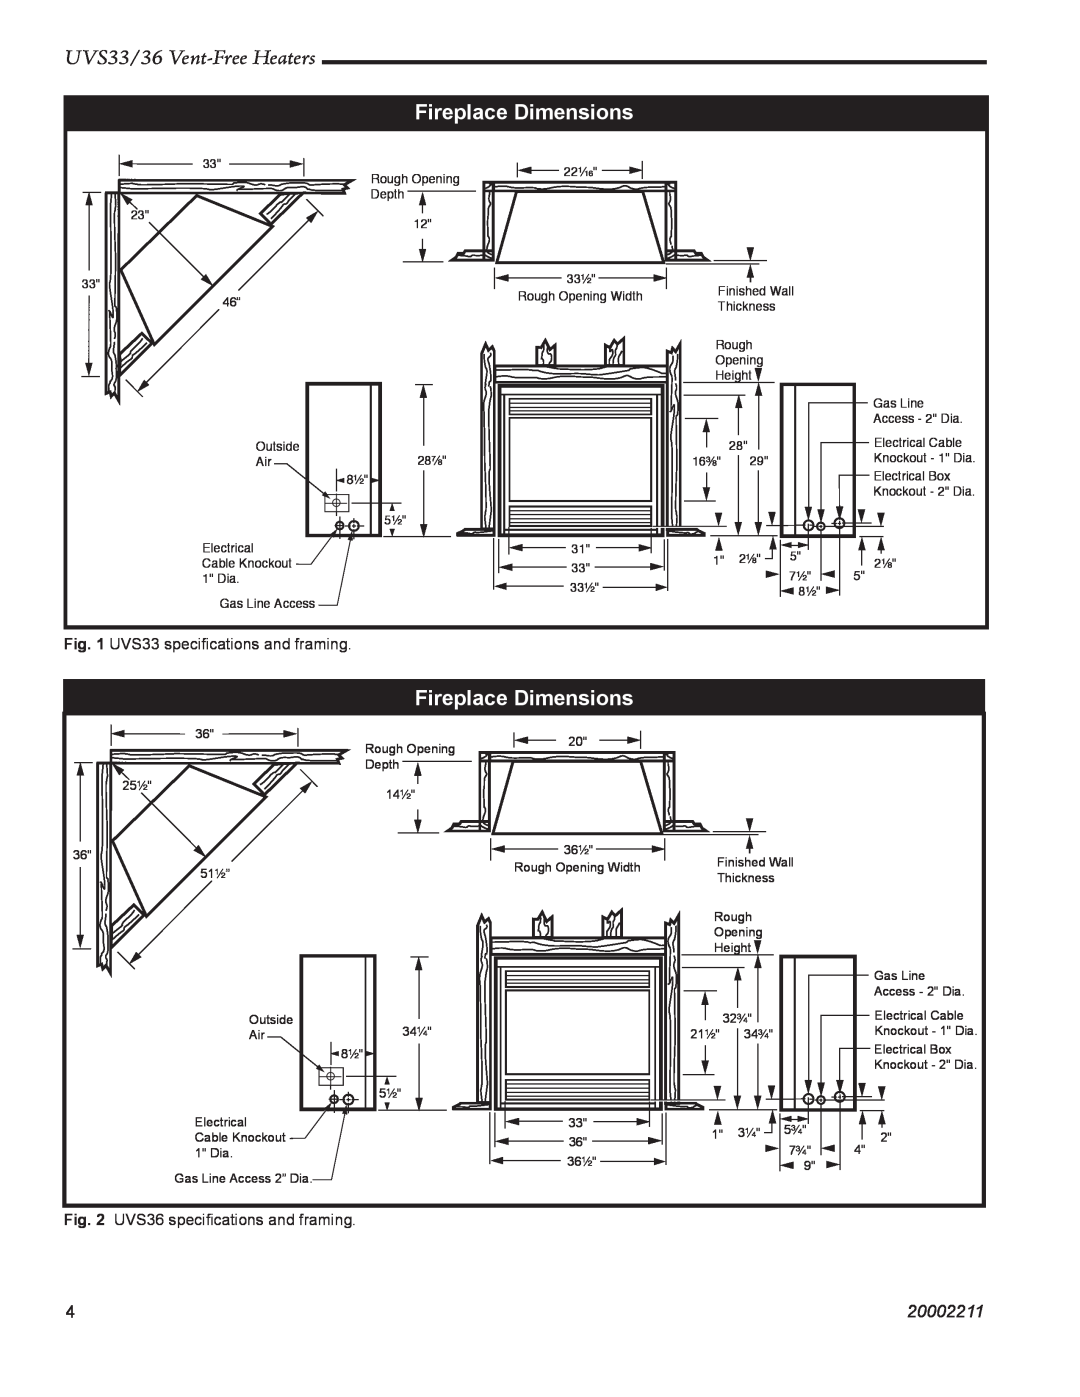 Majestic Appliances UVS33RP Fireplace Dimensions, UVS33/36 Vent-FreeHeaters, 20002211, UVS33 speciﬁcations and framing 